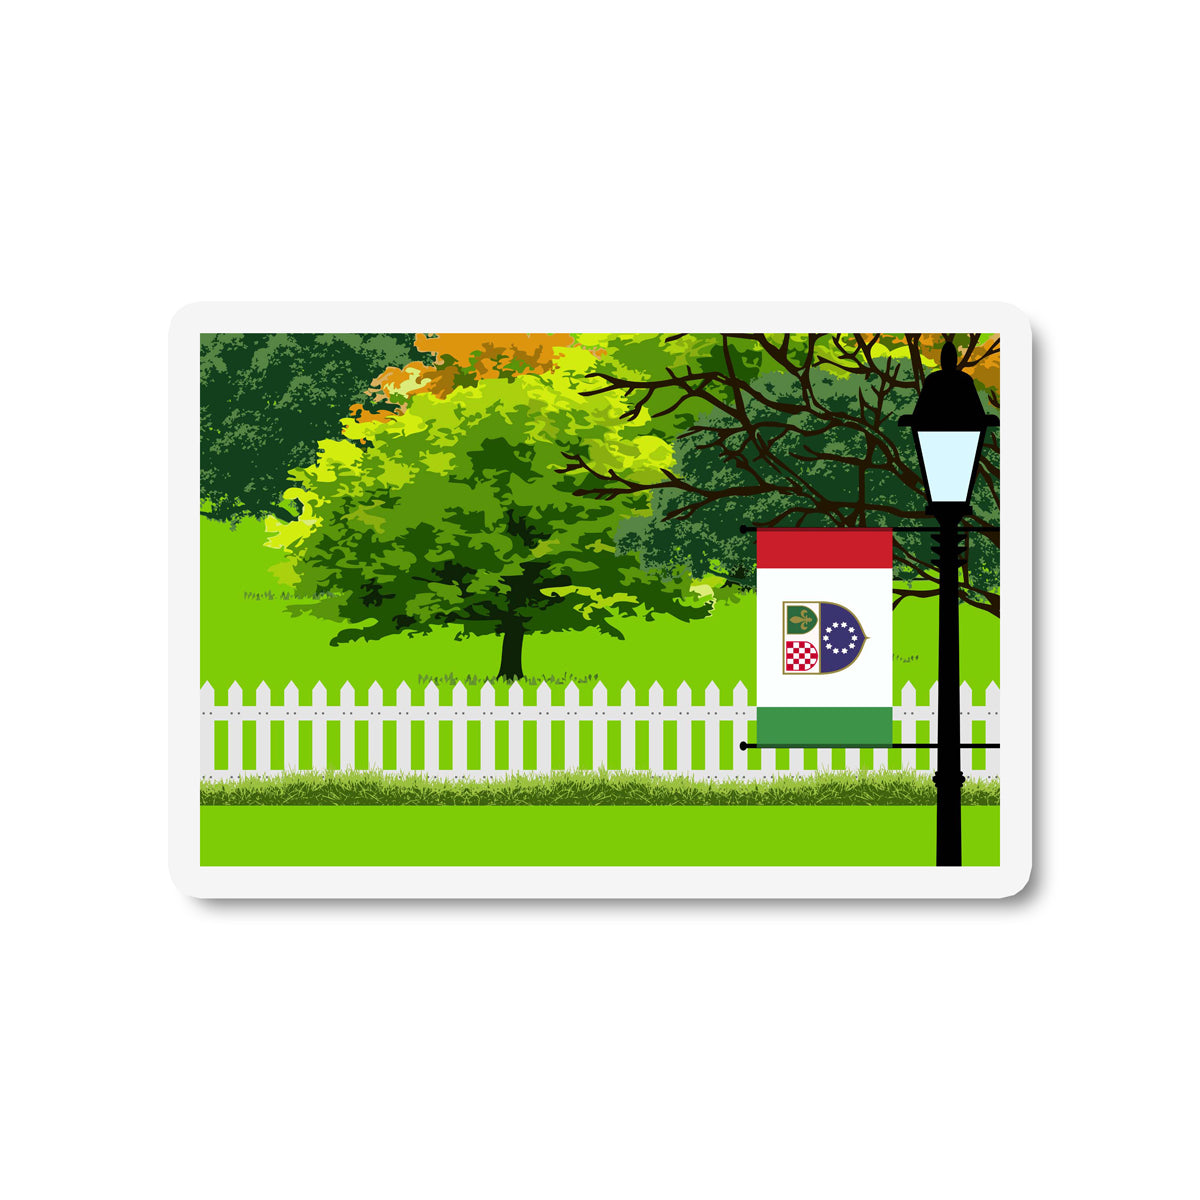 Bosnia and Herzegovina Federation of Flag Trees and Street Lamp Sticker